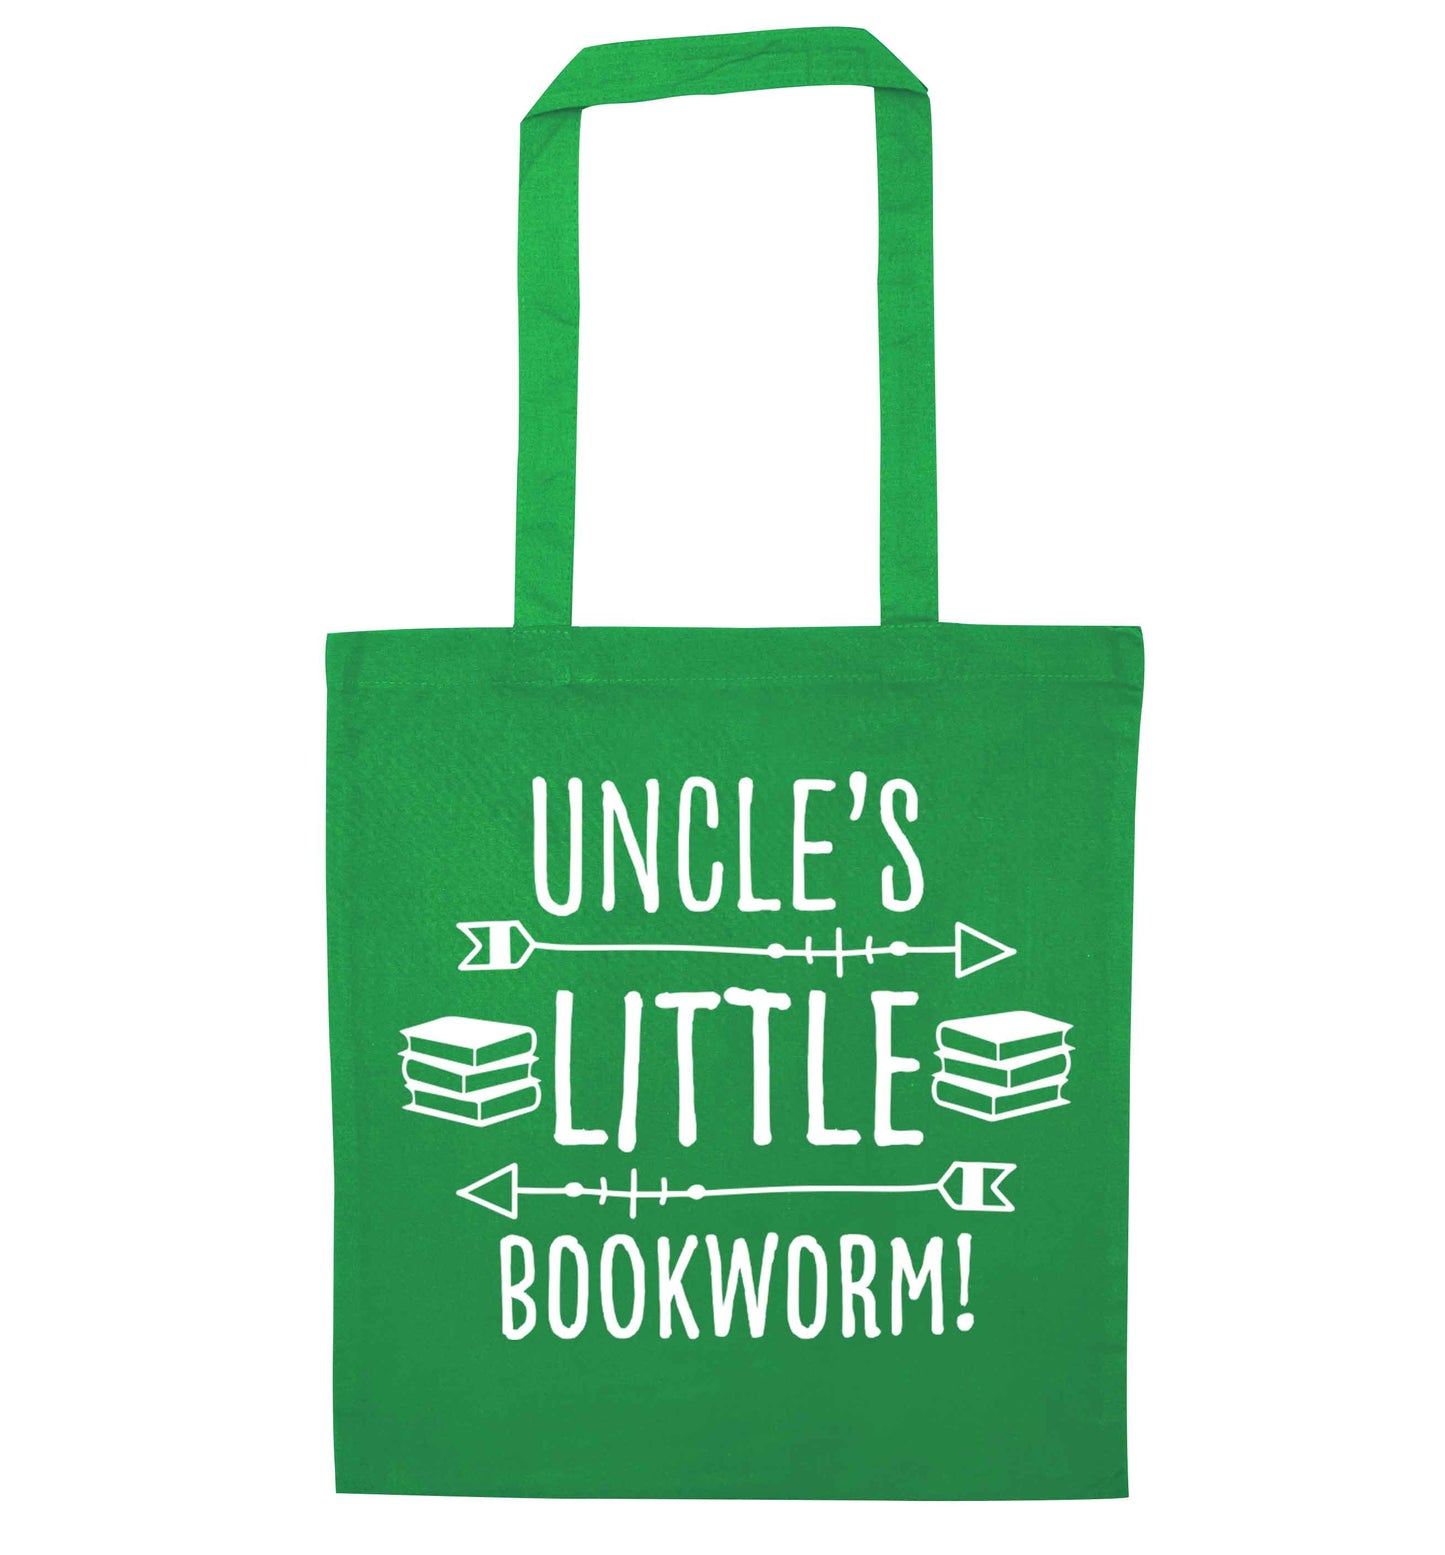 Uncle's little bookworm green tote bag